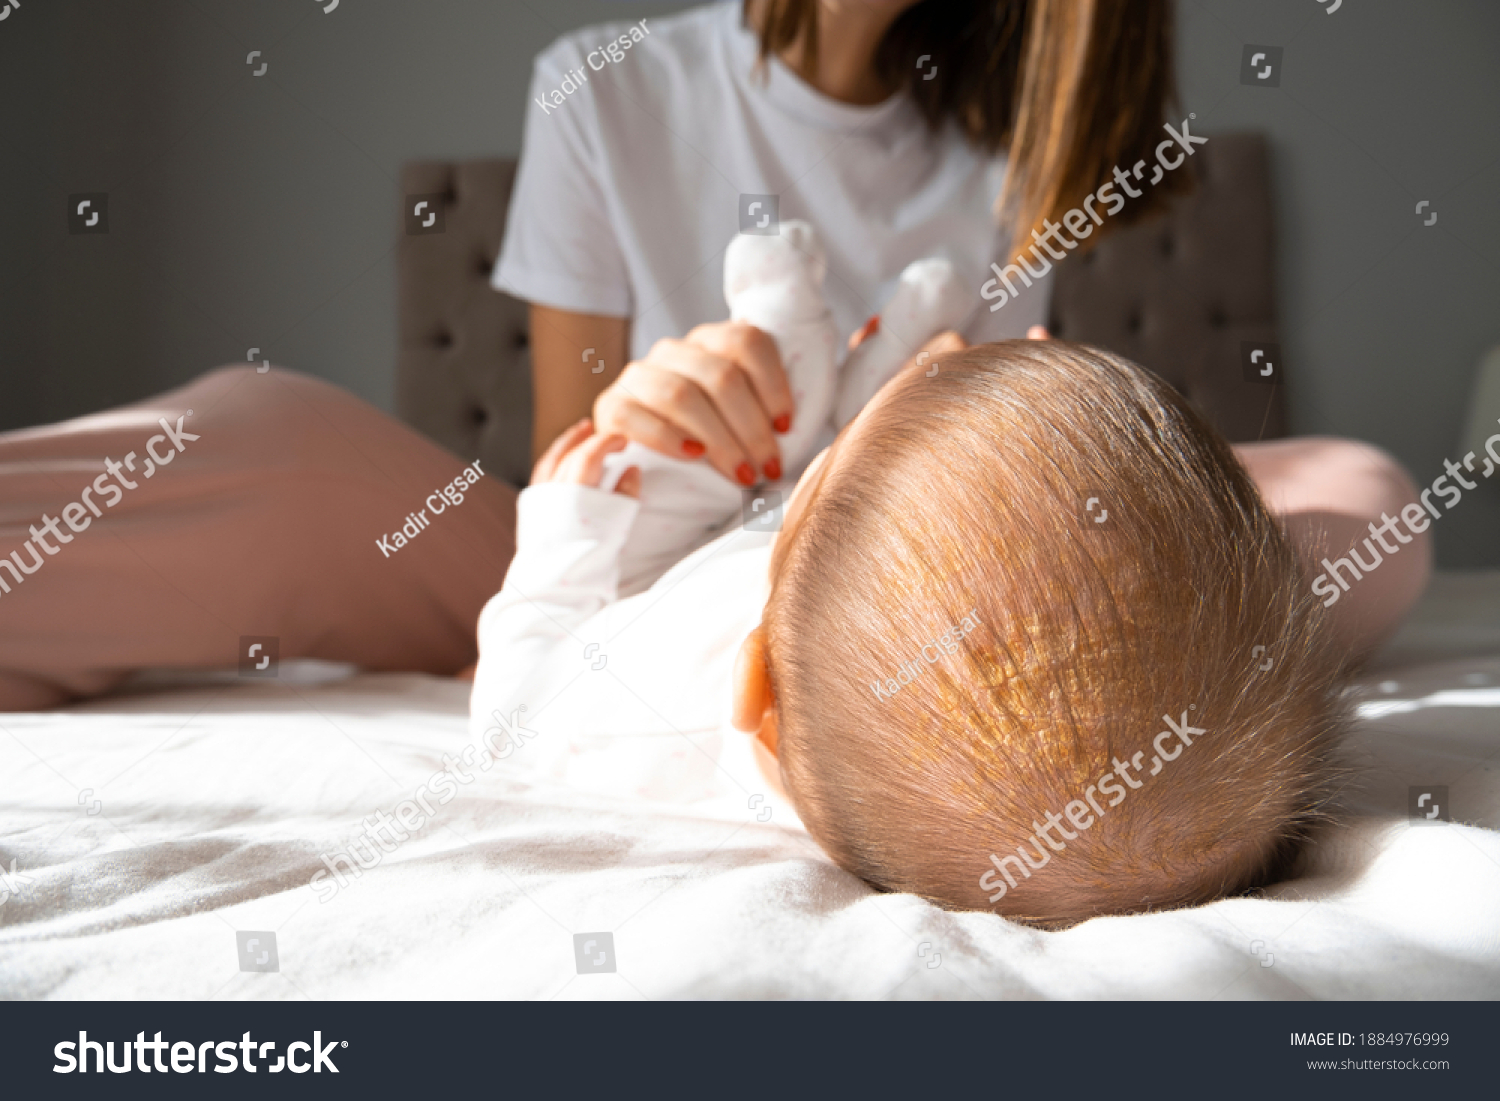 A baby girl has infantile Seborrheic Dermatitis - cradle cap and lying in bed with her mother. white backgrund and isolated. newborn baby. selective focus. #1884976999